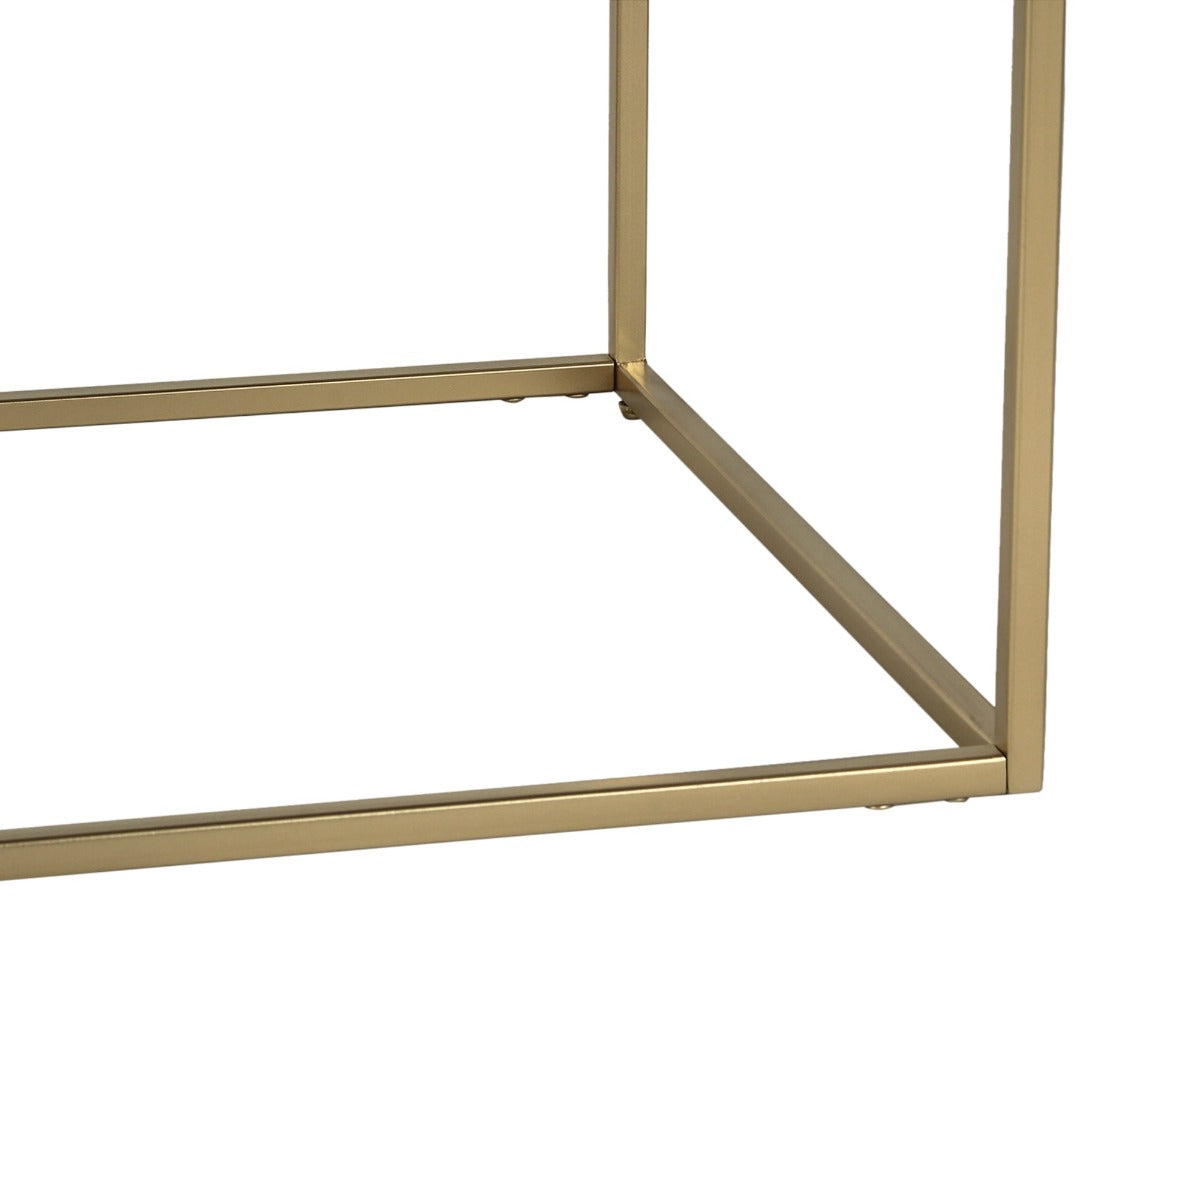 Noah Wooden Console Table In Gold Finish